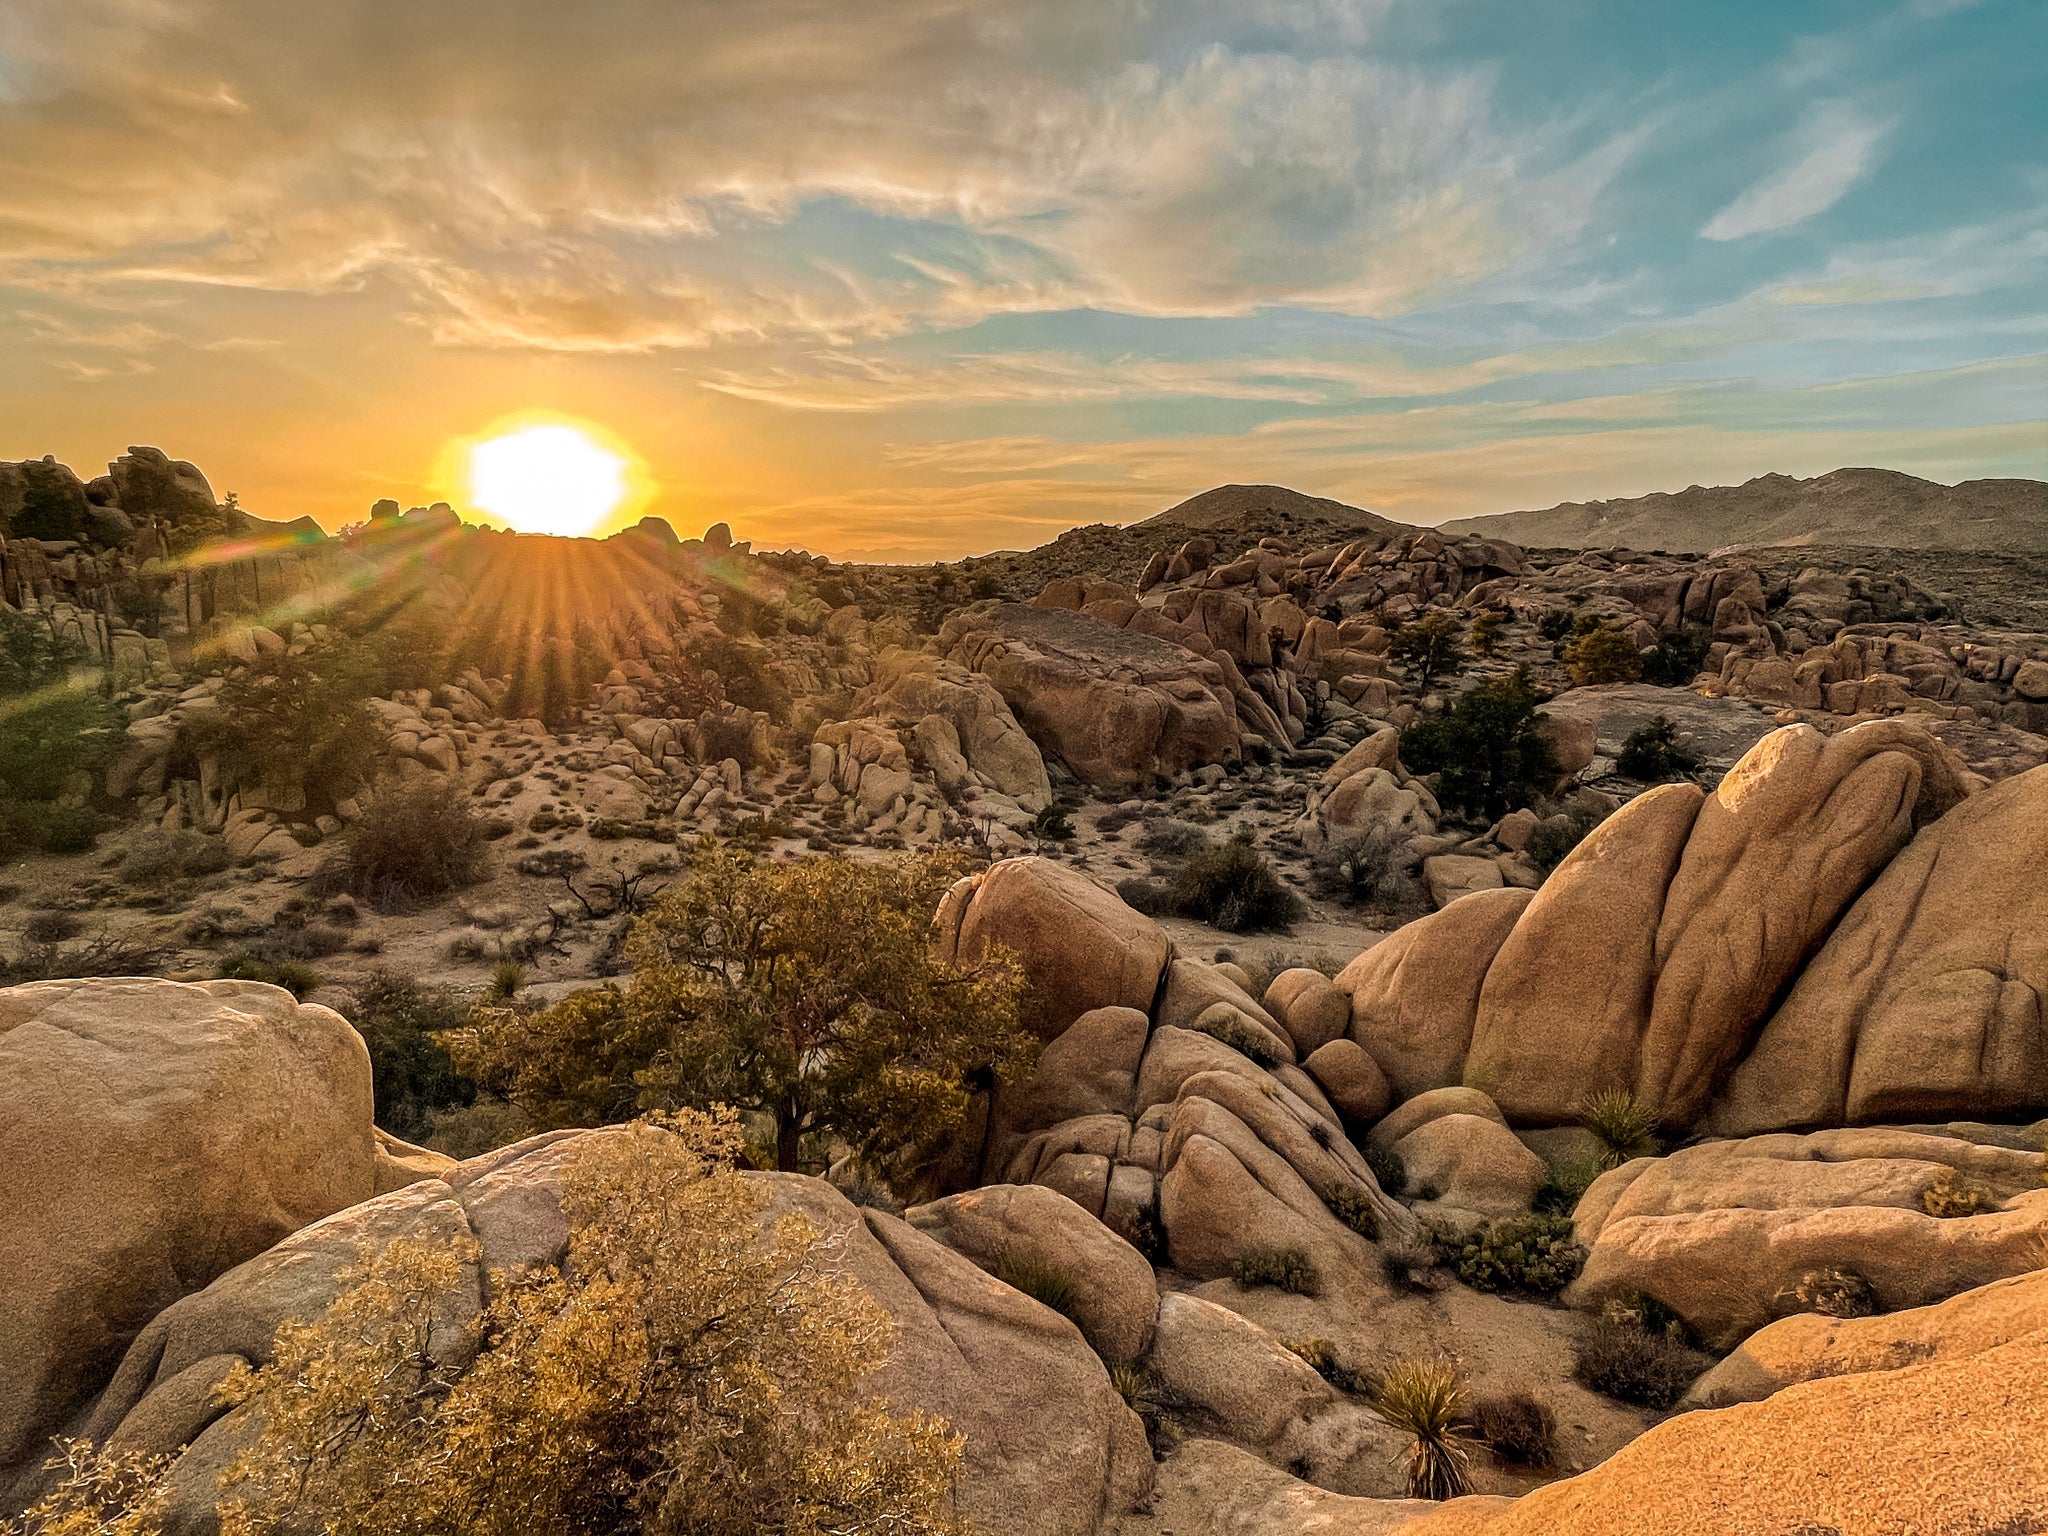 What to do in Joshua Tree National Park